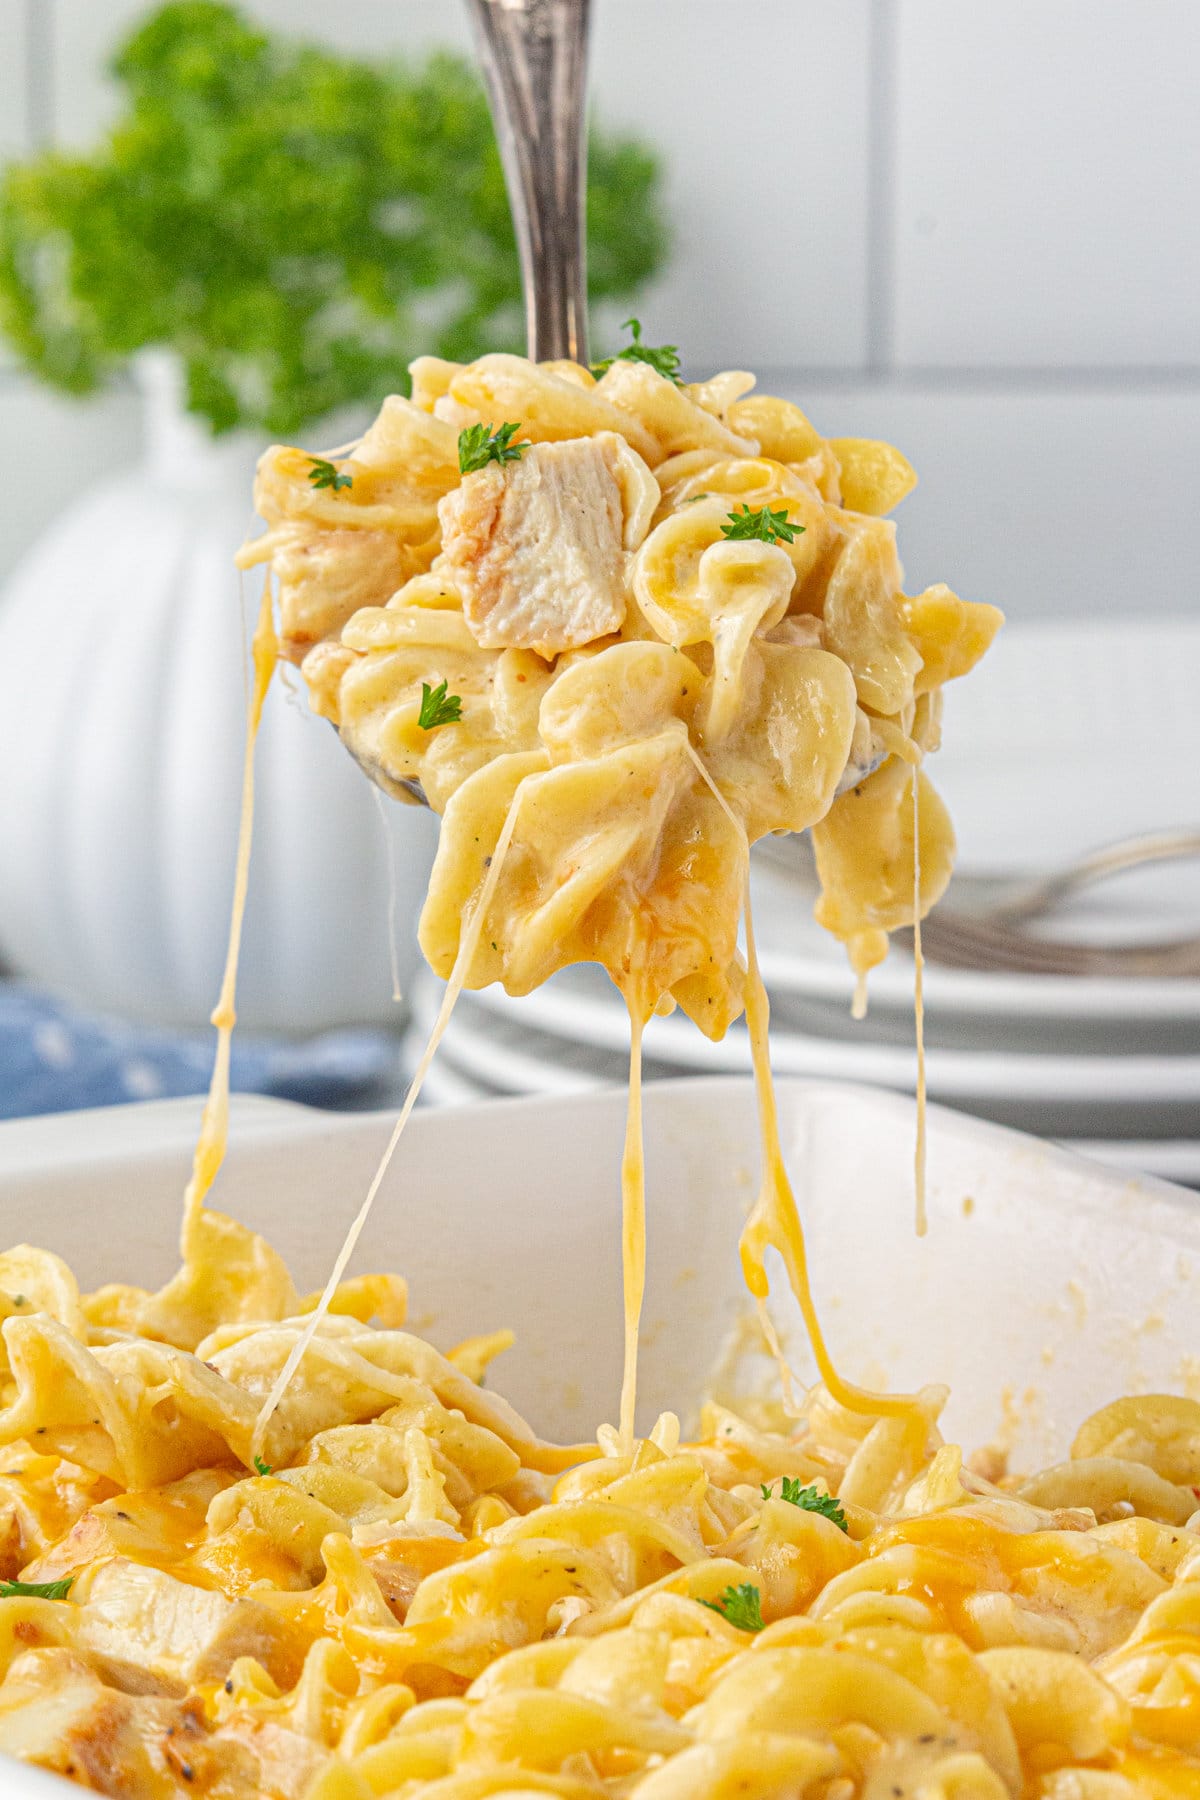 A spoonful of cheesy angel chicken and noodles held over the casserole dish.